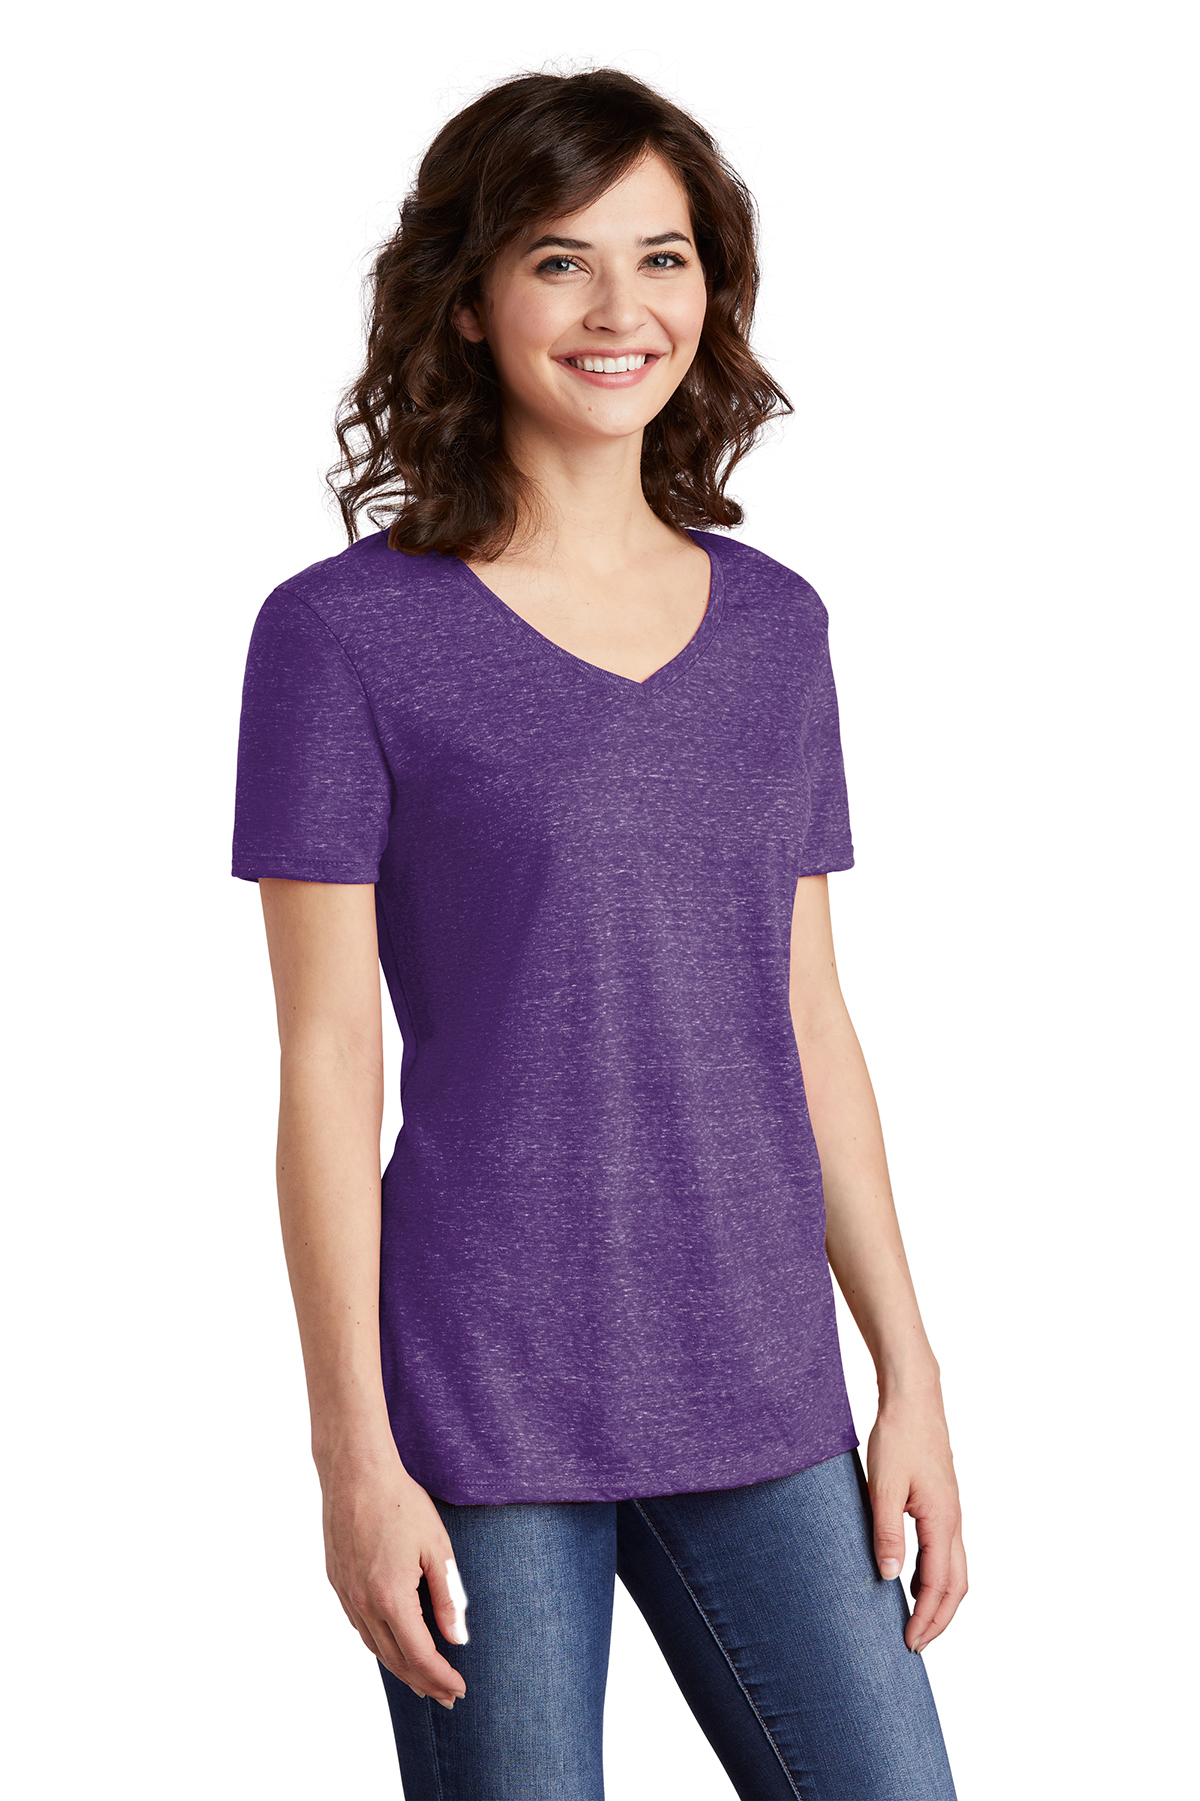 JERZEES Ladies Snow Heather Jersey V-Neck T-Shirt | Product | Company ...